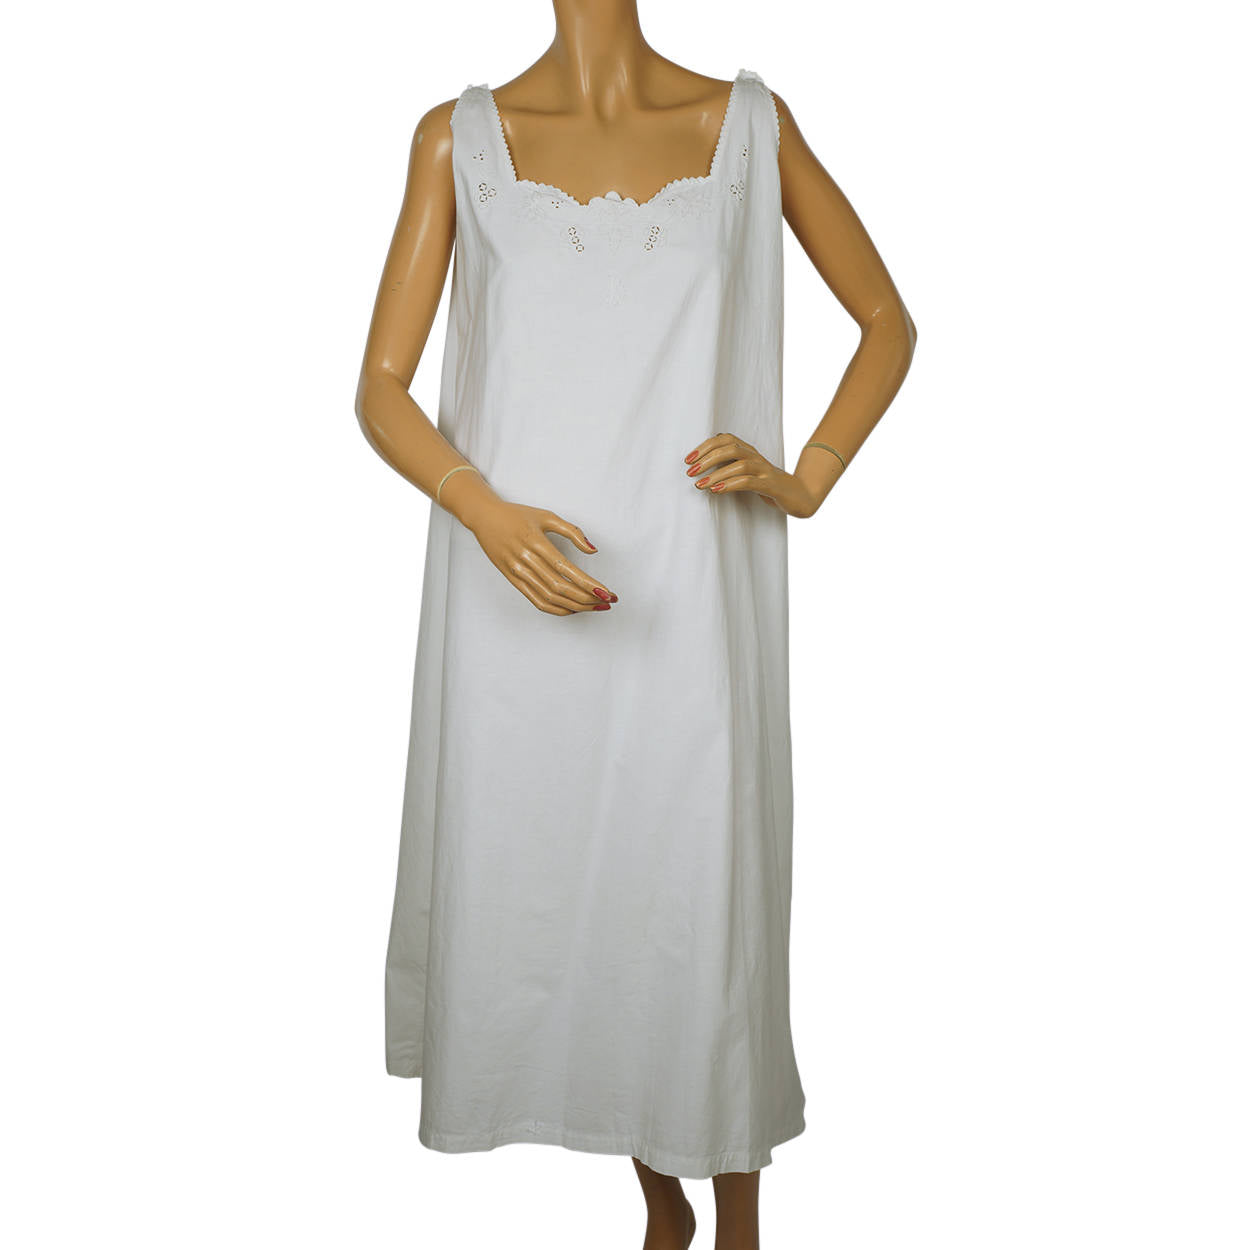 Antique White Cotton Nightie Embroidered Nightgown 1910s Size Large